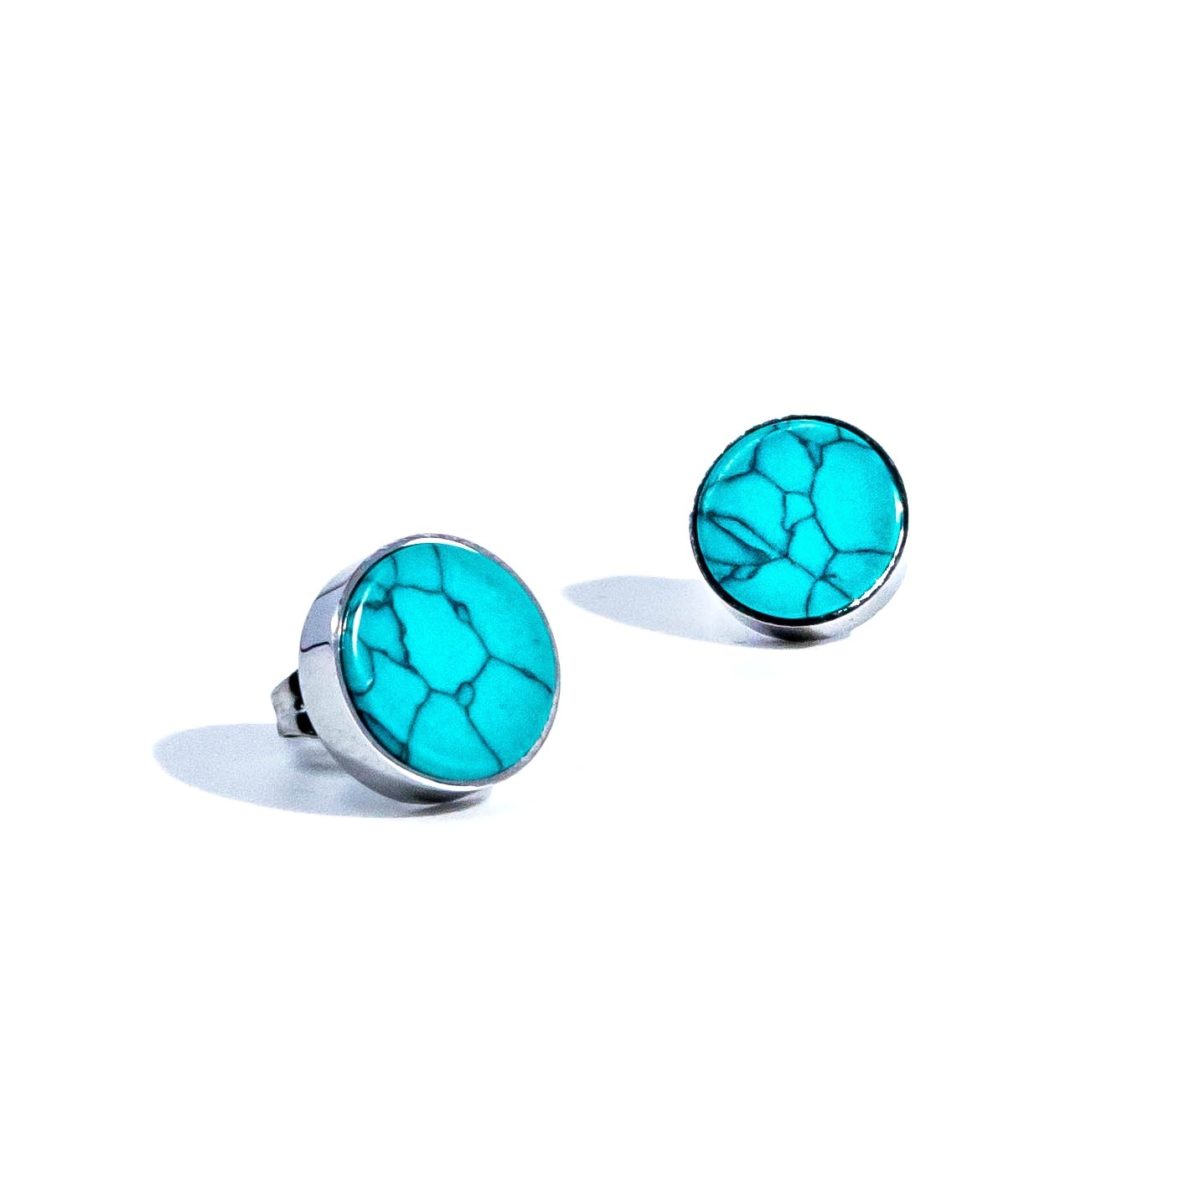 https://m.clubbella.co/product/ethan-turquoise-gemstone/ Ethan (5)